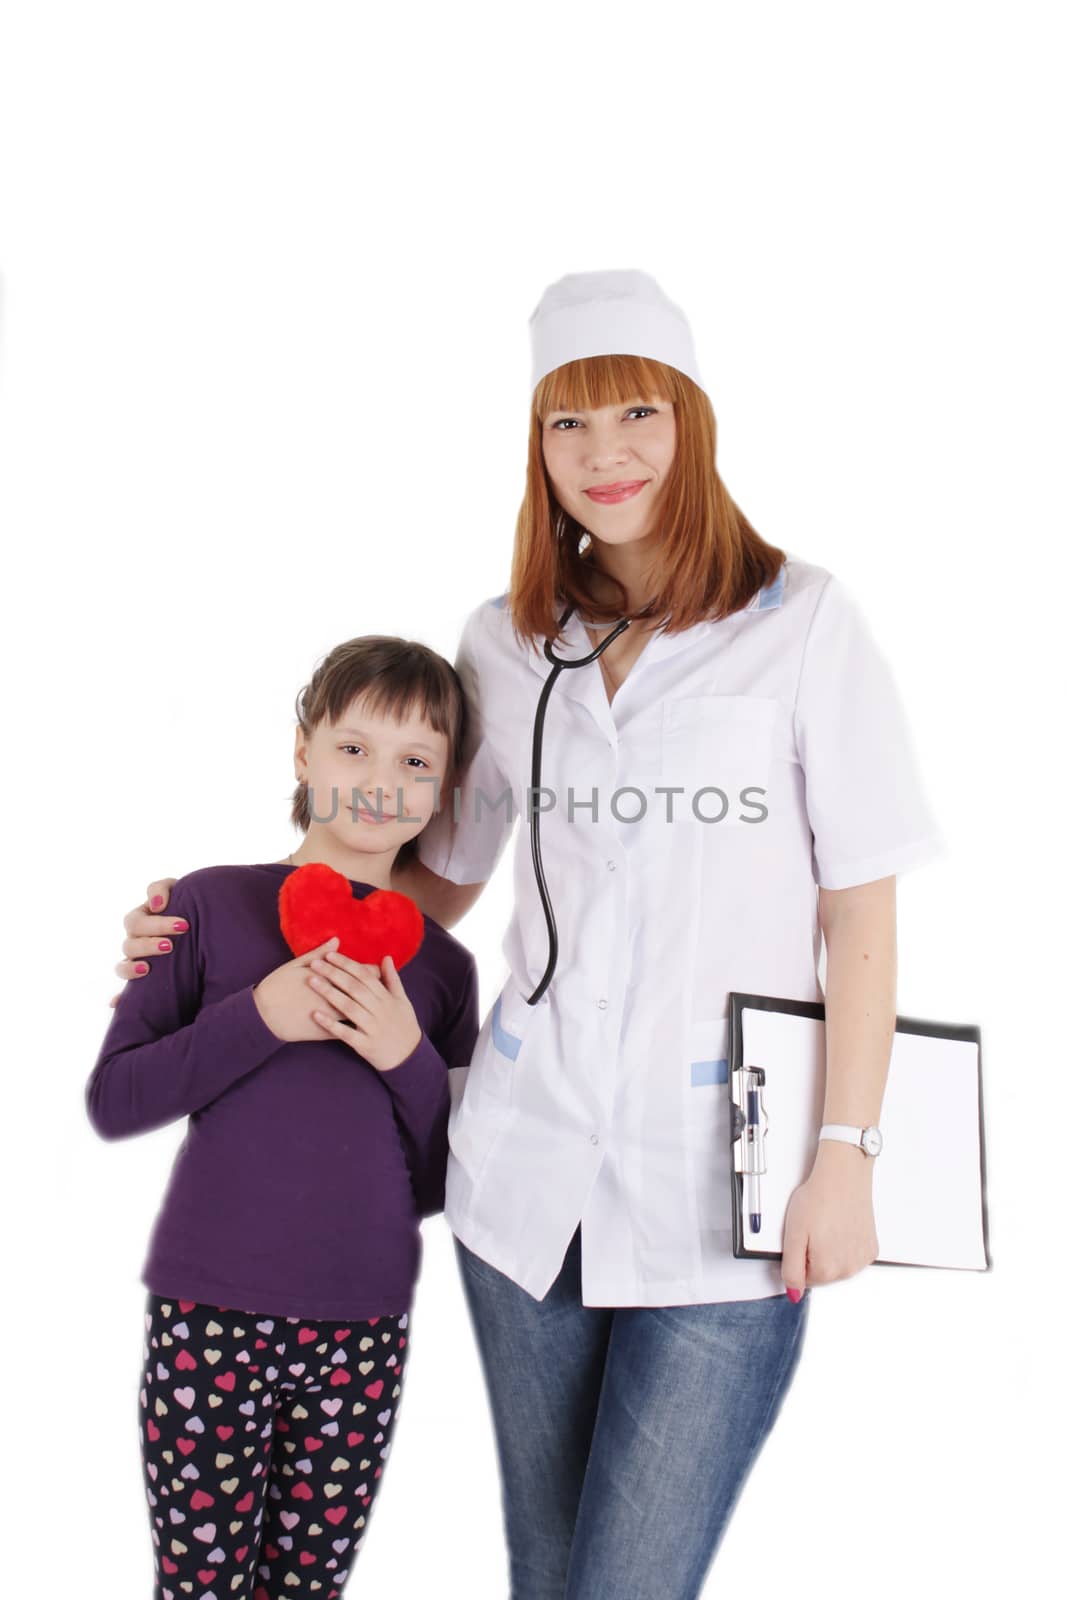 Smiling female doctor and little girl holding plush heart by Angel_a